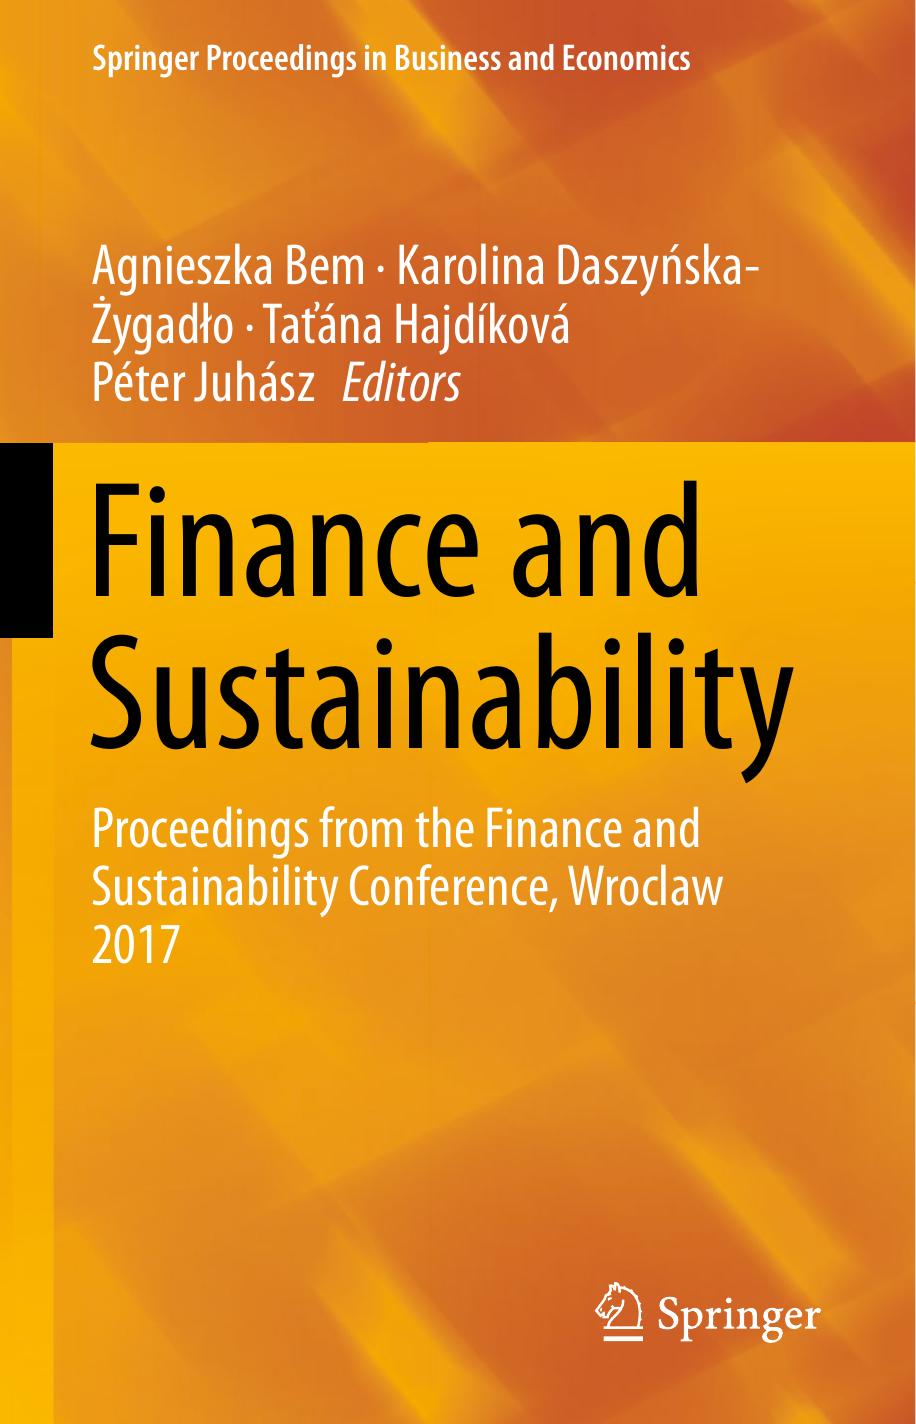 Finance and Sustainability  Proceedings from the Finance and Sustainability Conference, Wroclaw 2017.pdf